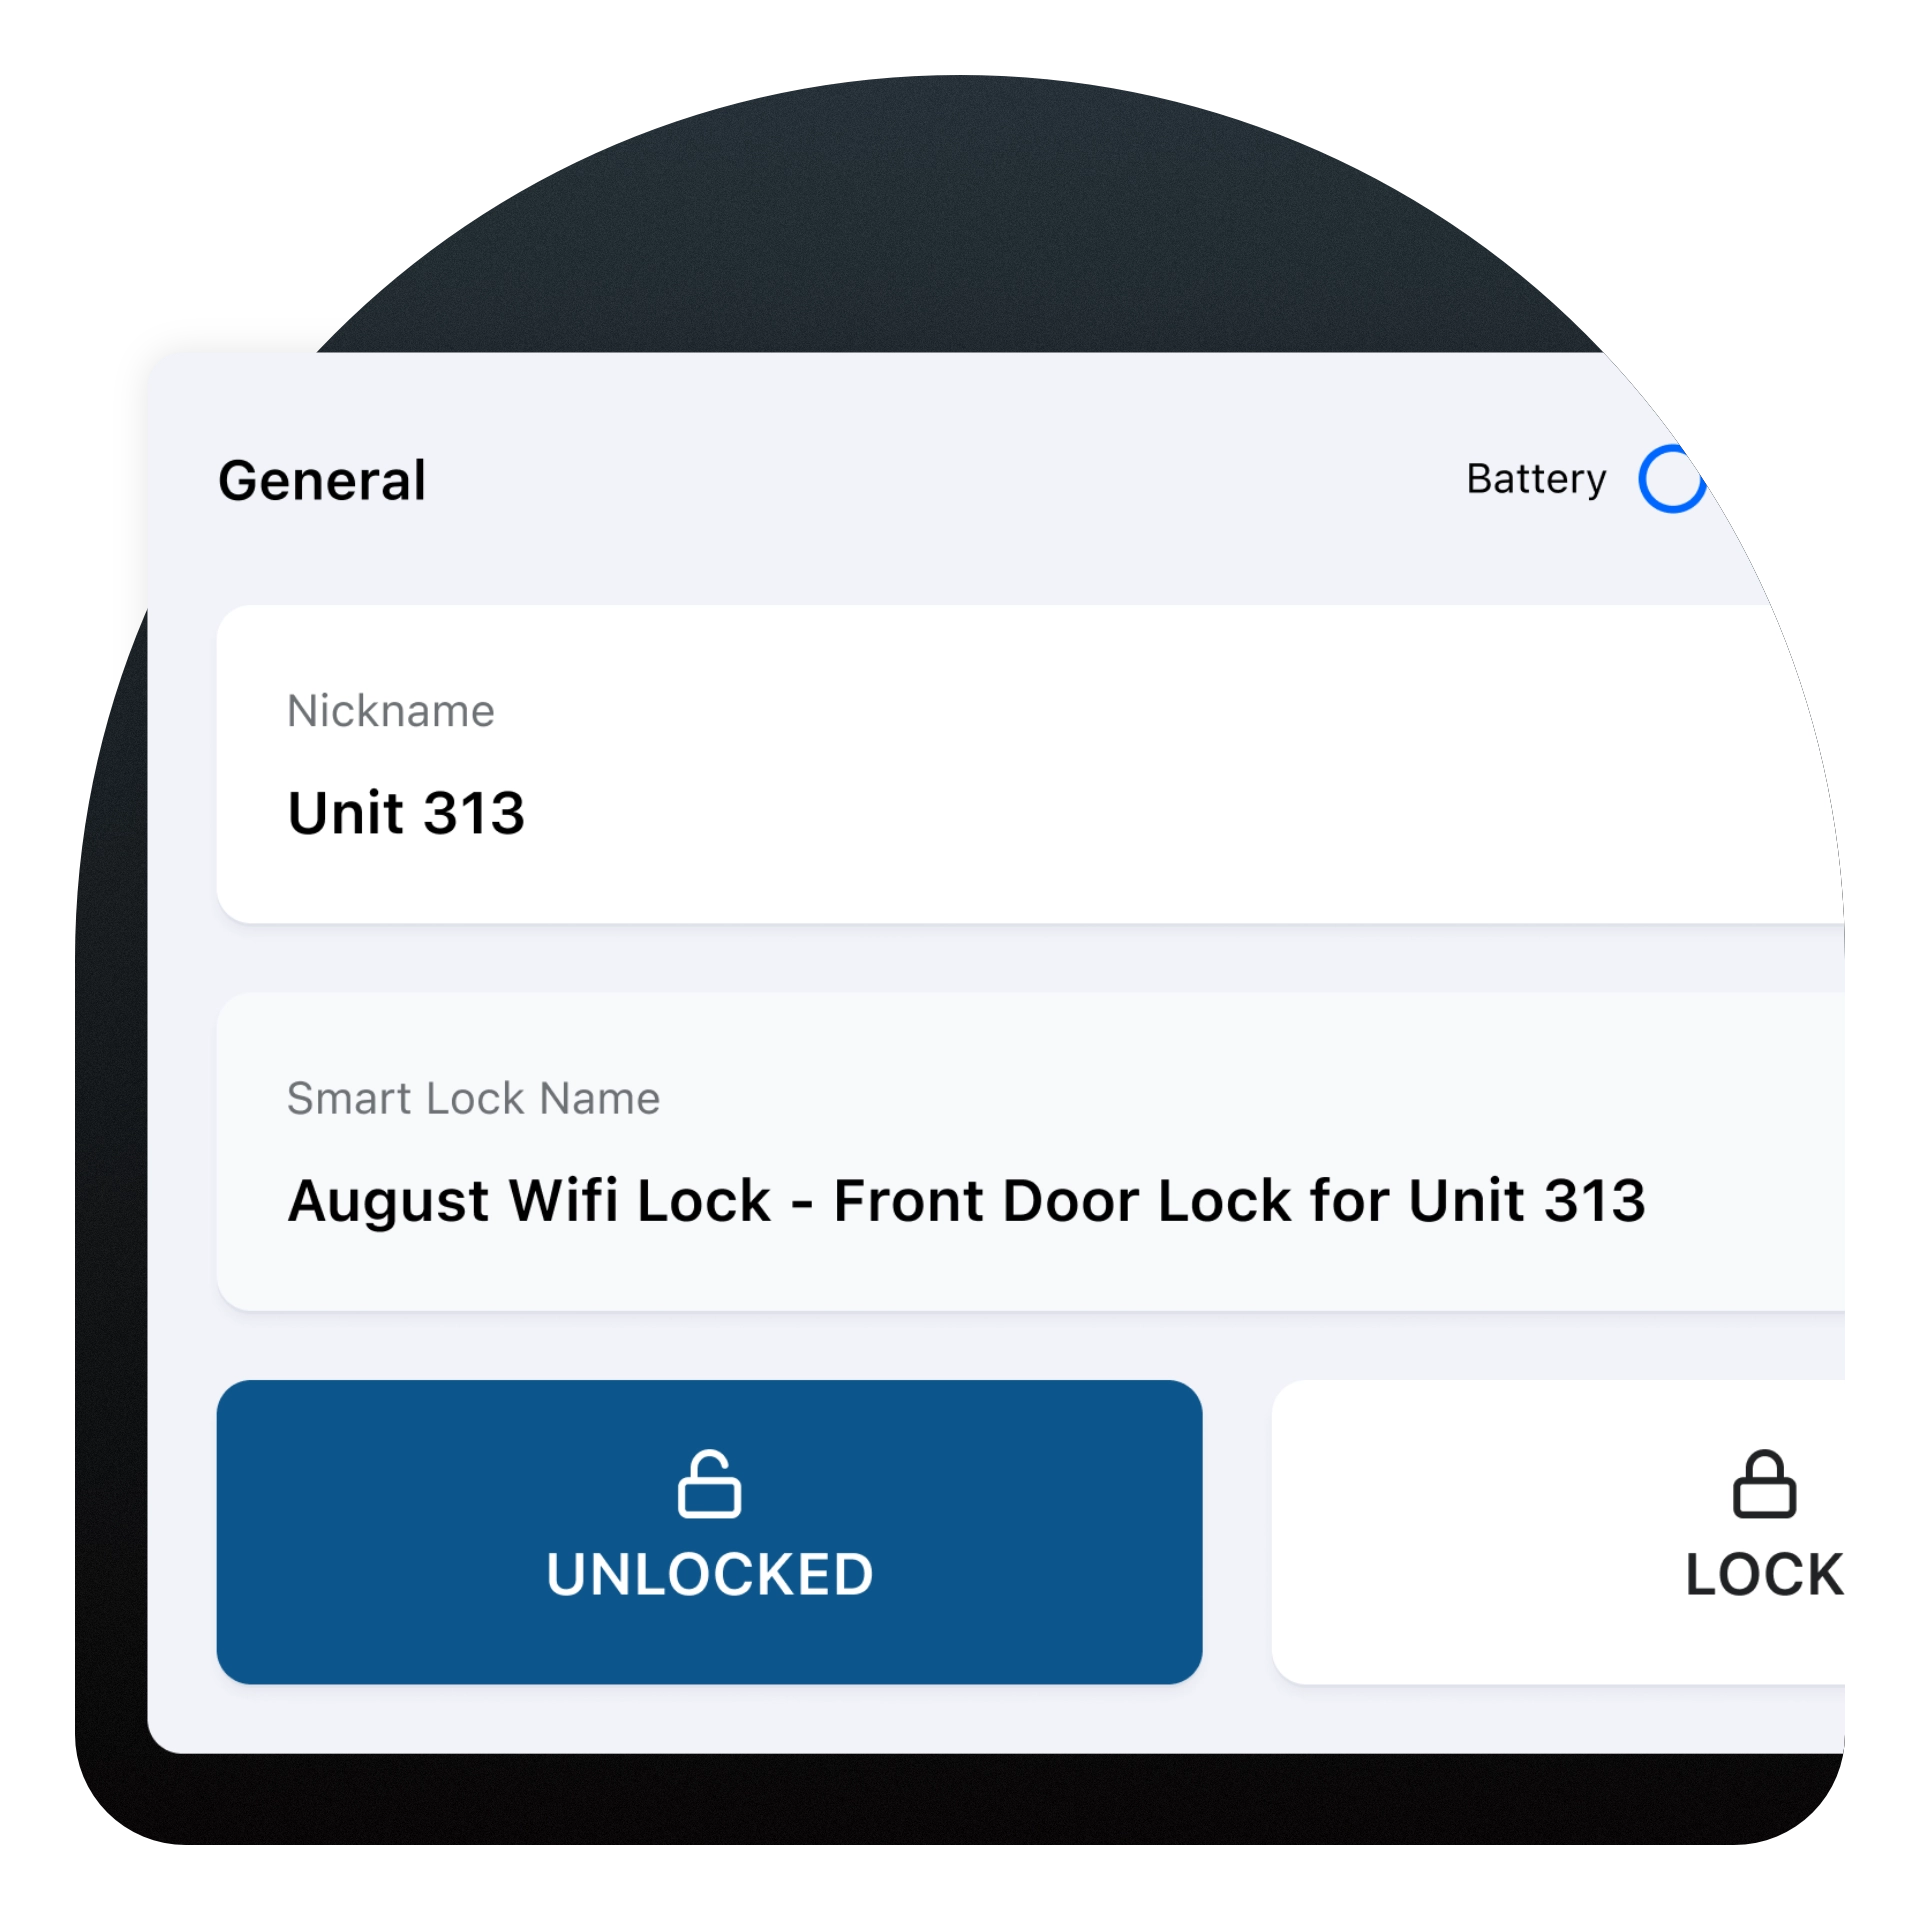 Remote lock and unlock functionality in Enso Connect